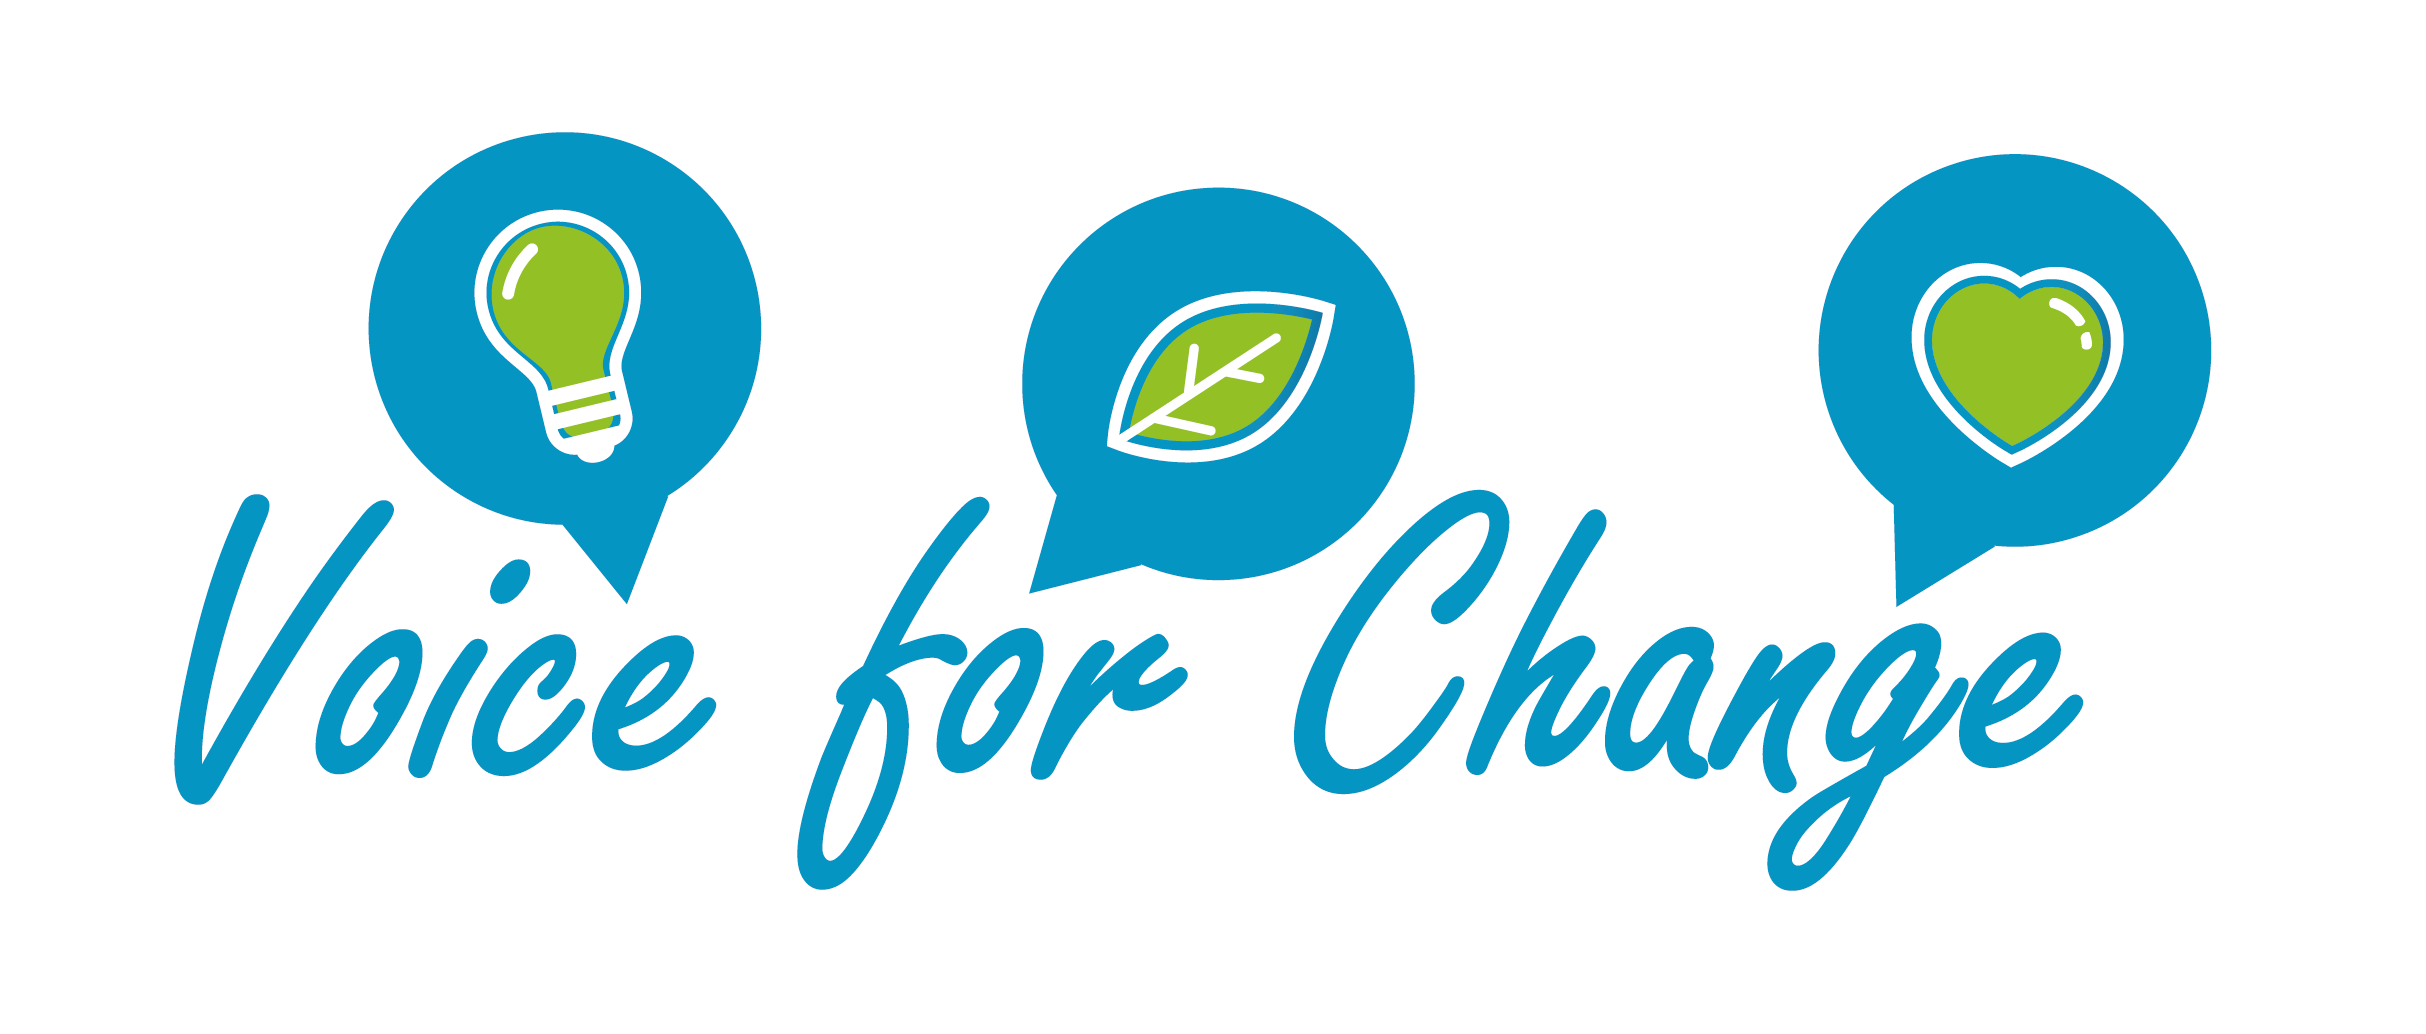 Voice for change logo